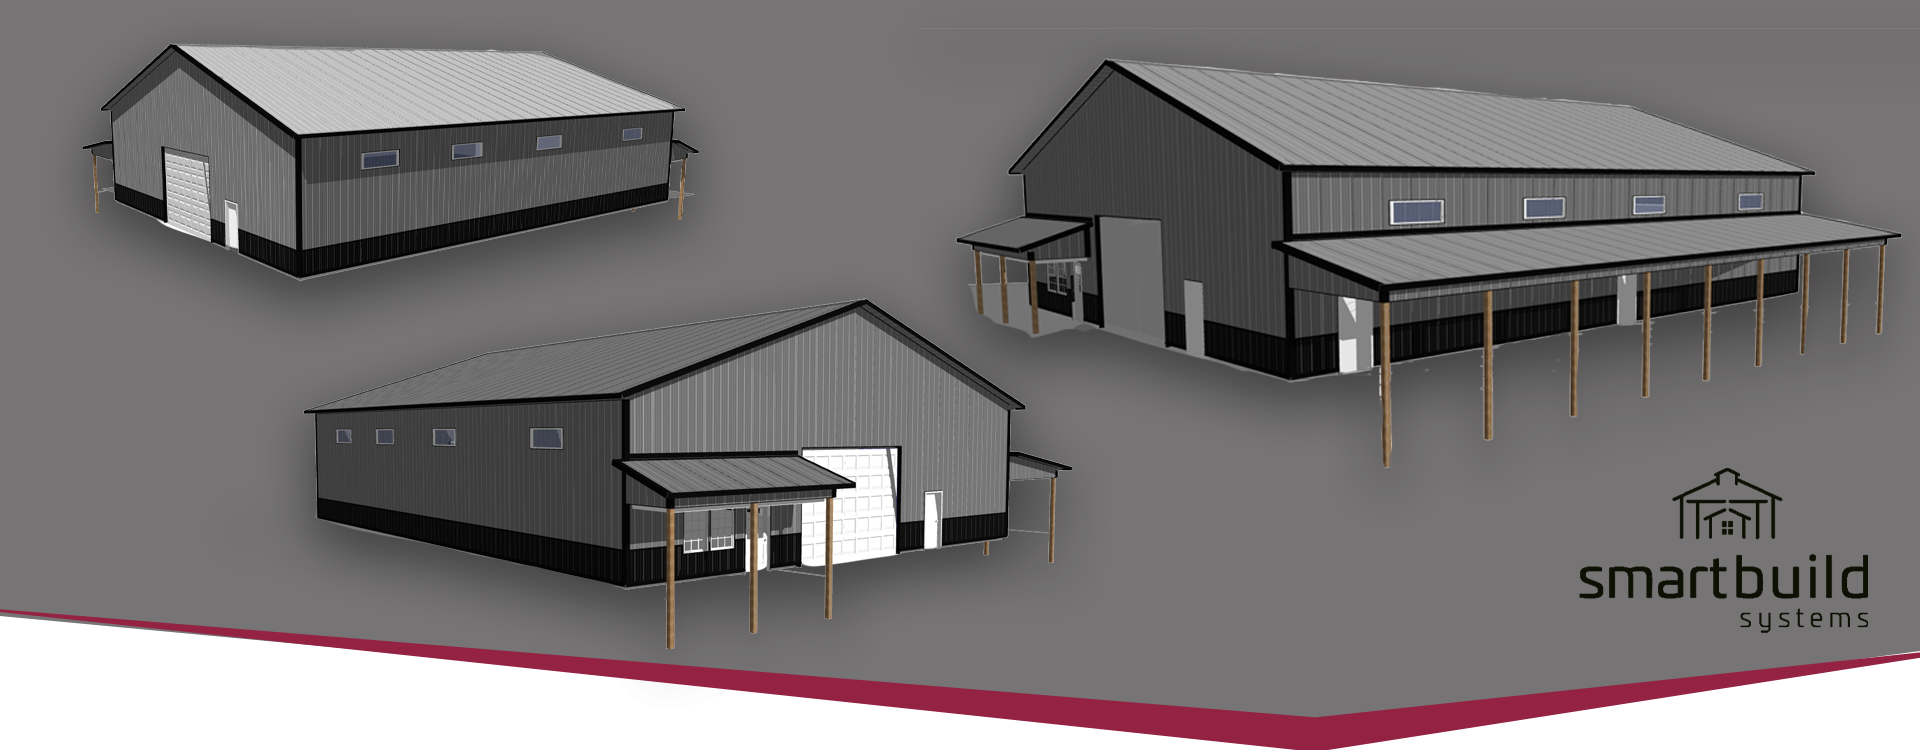 3d rendering designs of post frame barns and buildings